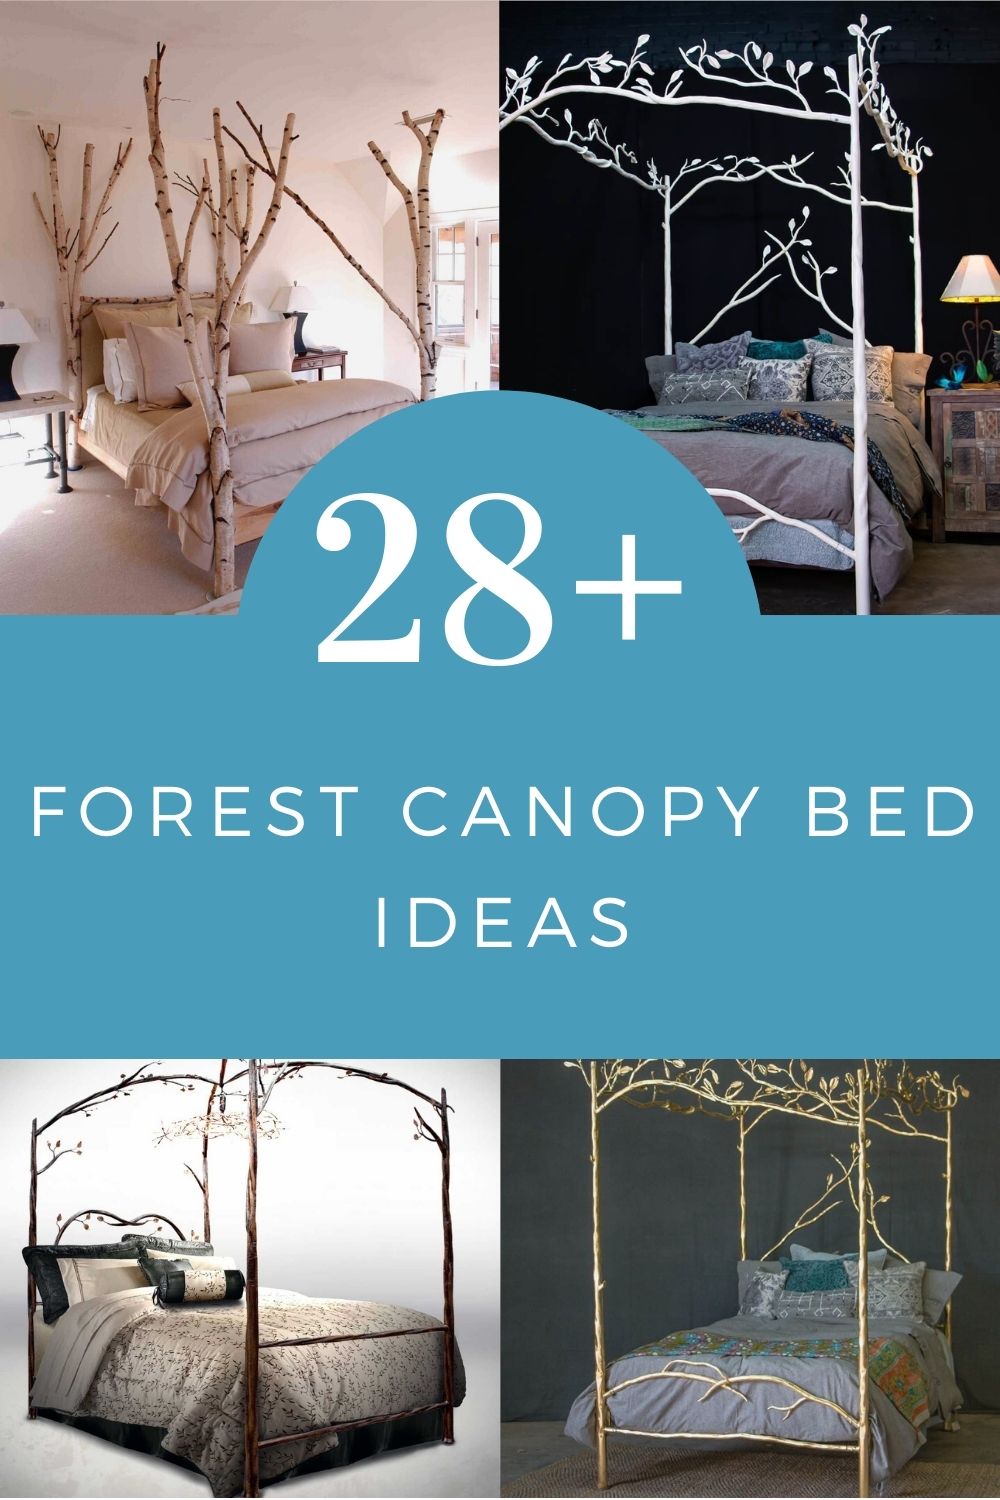 28+ Forest Canopy Bed Ideas Will Make You Sleep Romantic